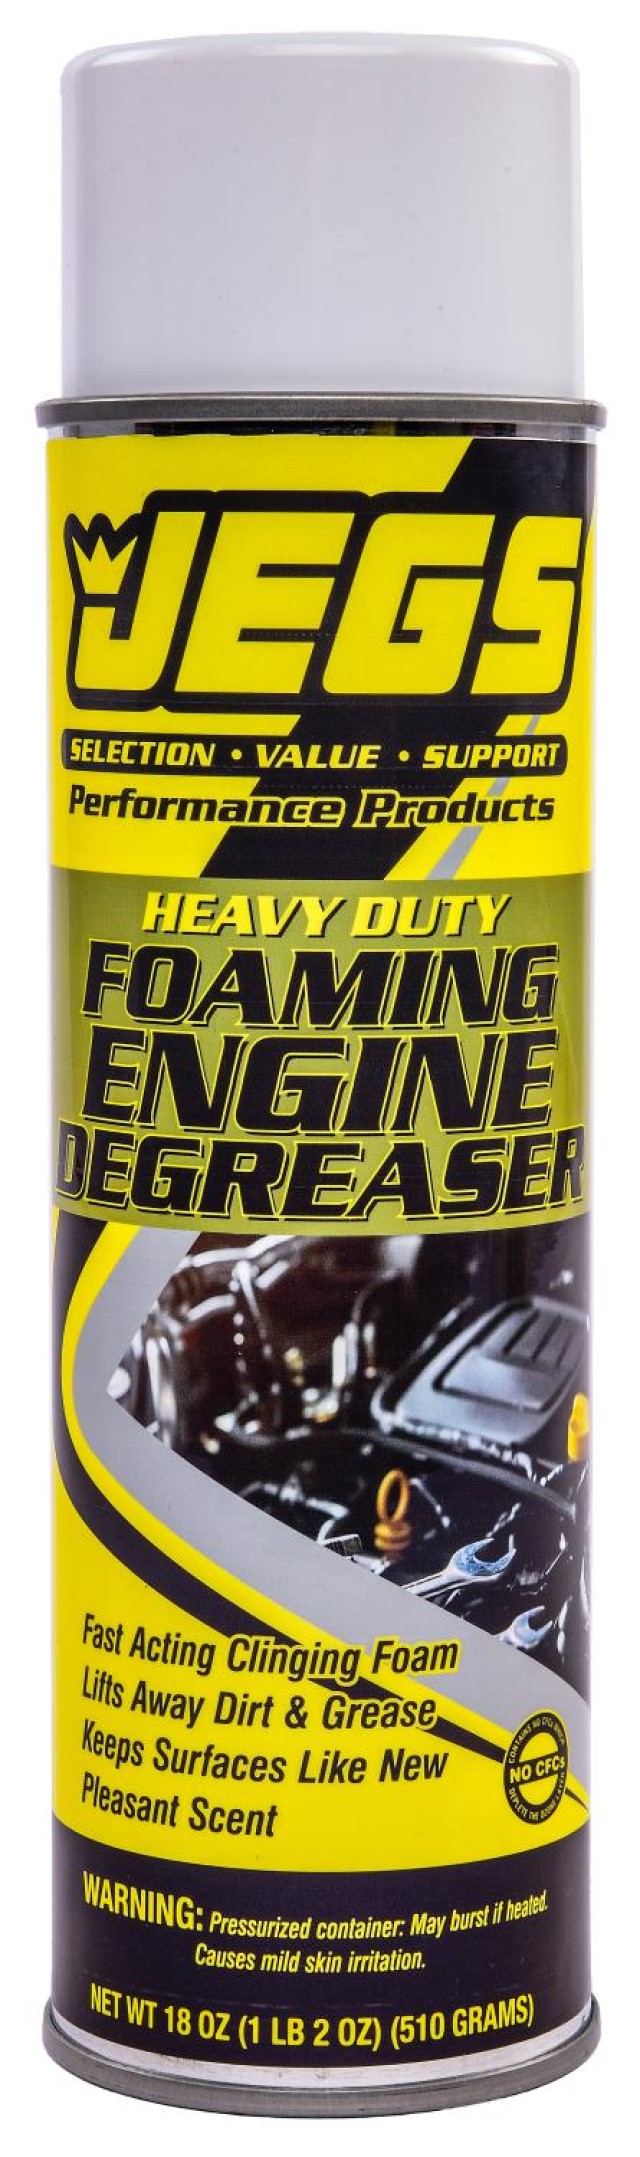 jegs foaming engine degreaser